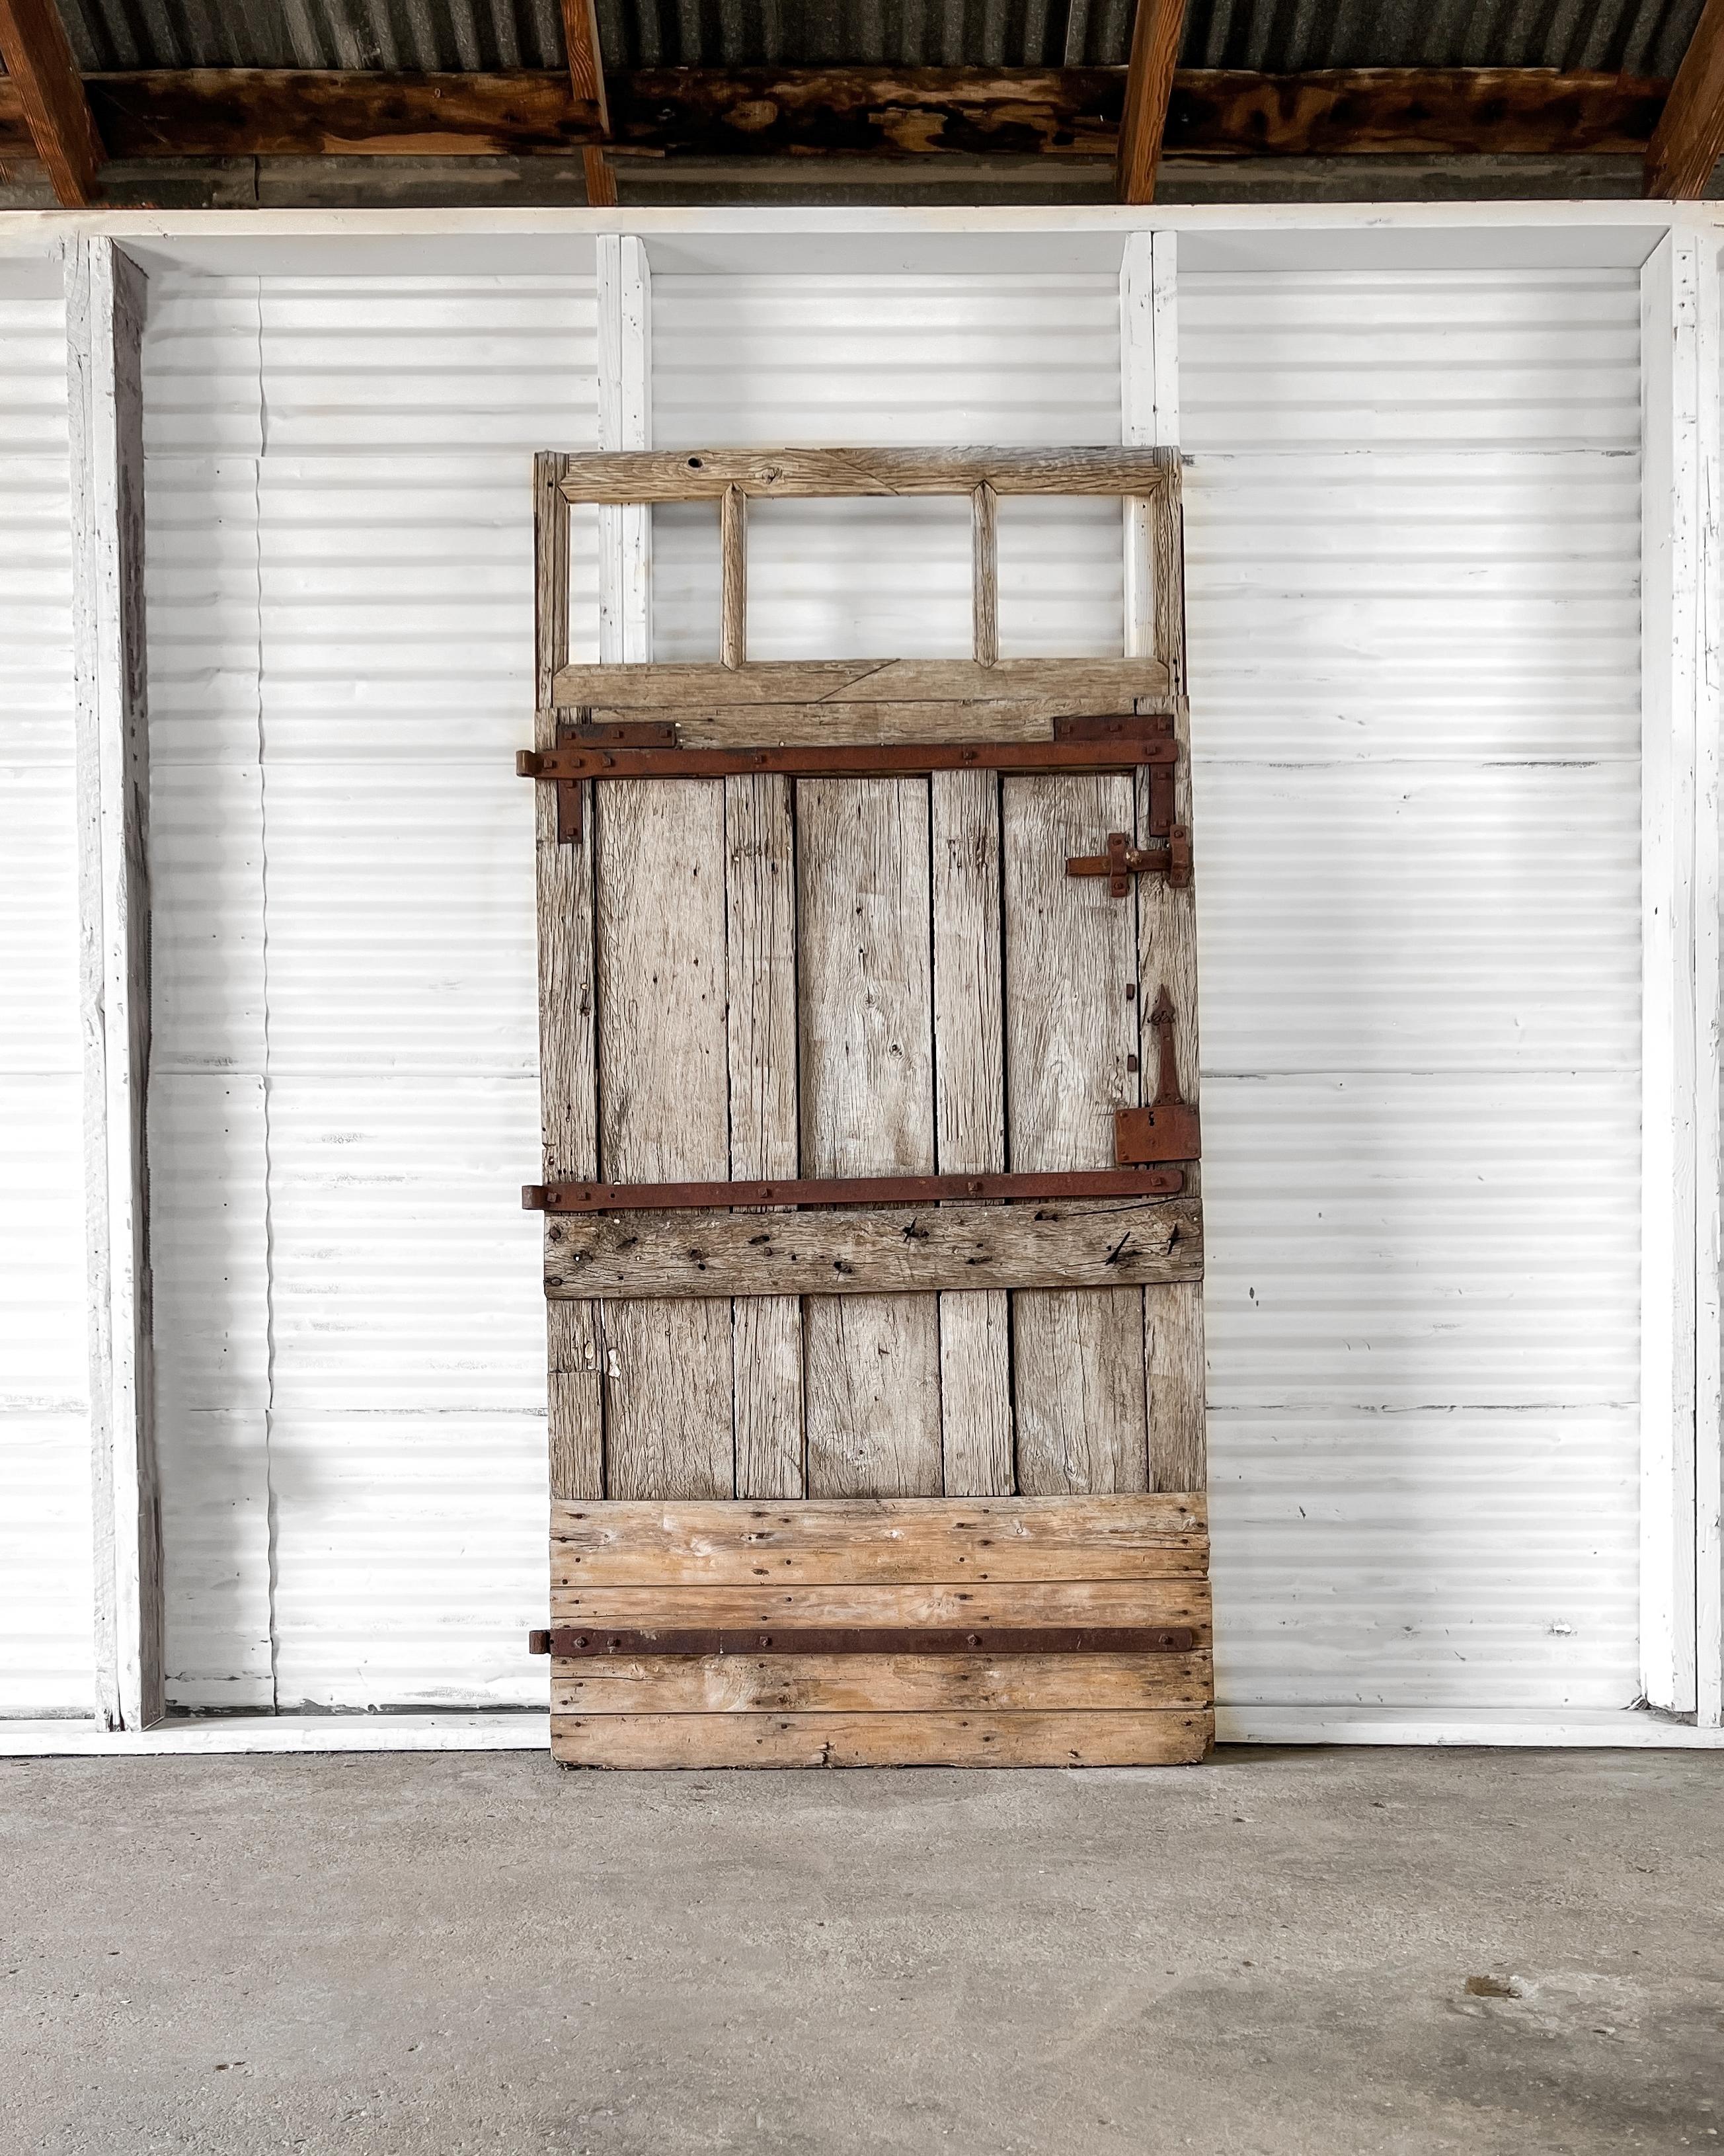 Weathered barn stall door salvaged from a French country farm. Primitive in design, the door is fitted with hand-forged iron hardware. Use to separate two spaces as a barn slide to bring a sense of history and texture to your home’s decor.

Salvaged